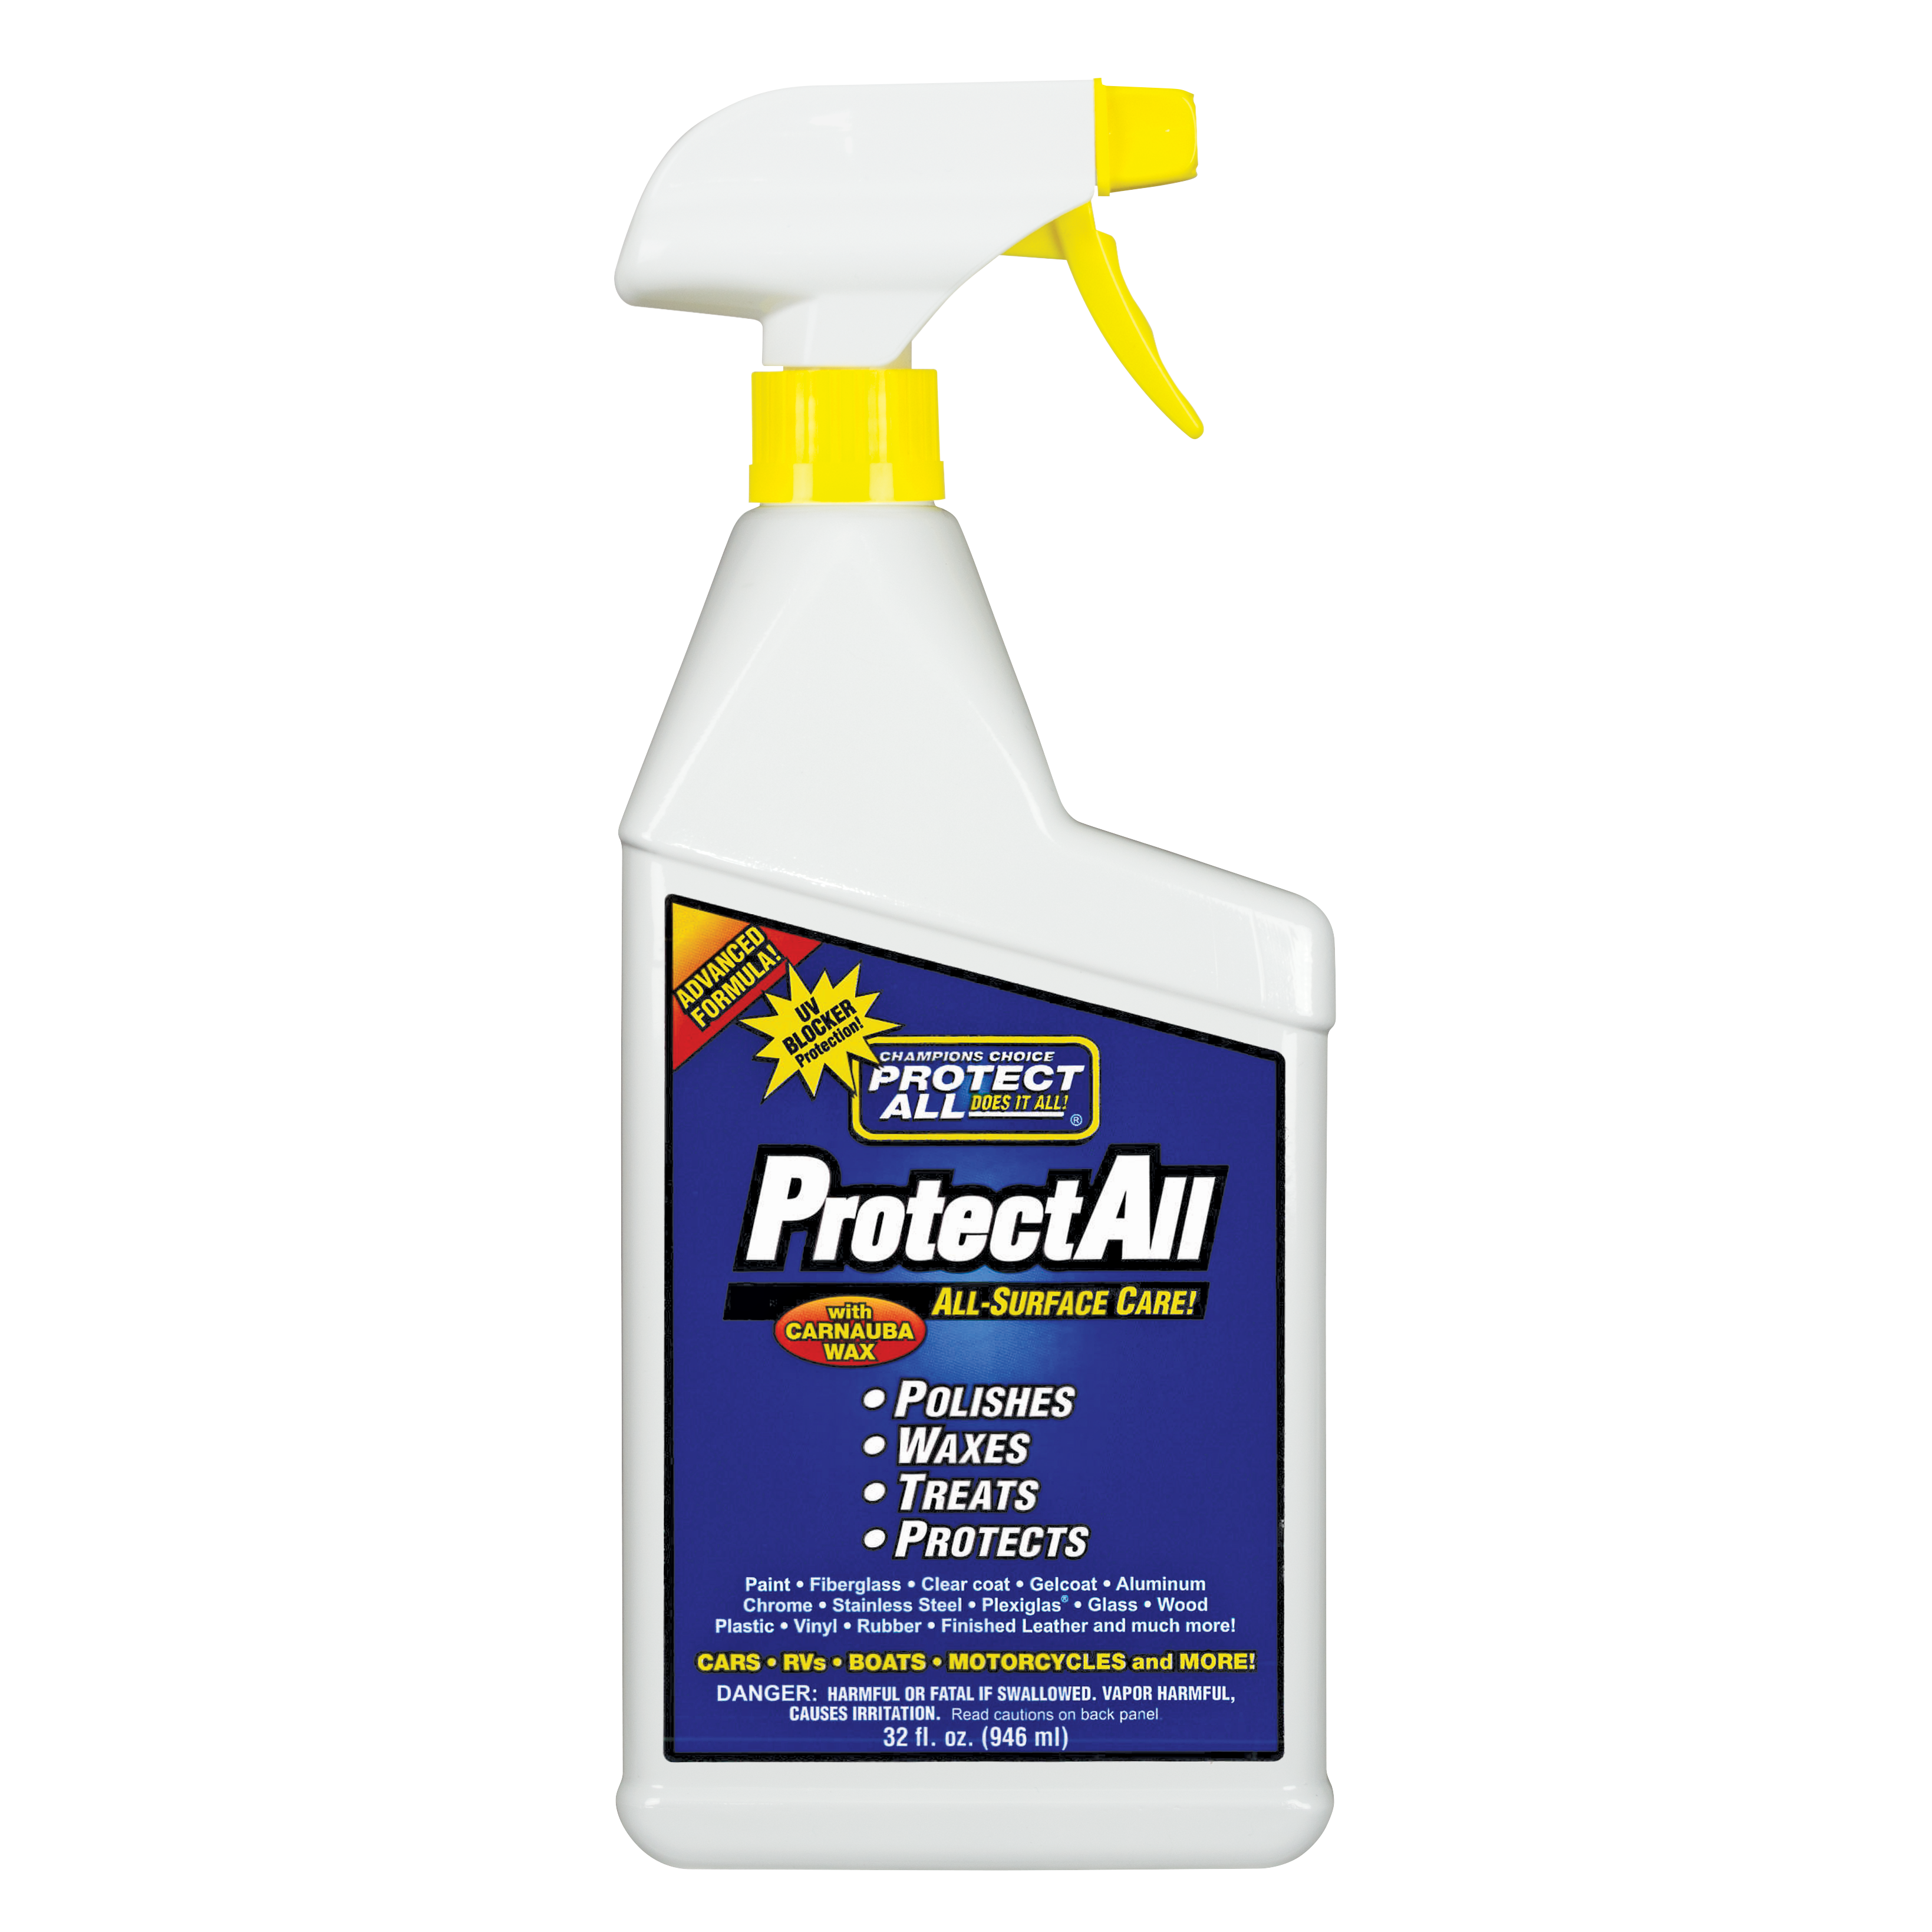 All-Surface Care - The four-in-one product that works on cars, RVs, boats,  motorcycles, and more